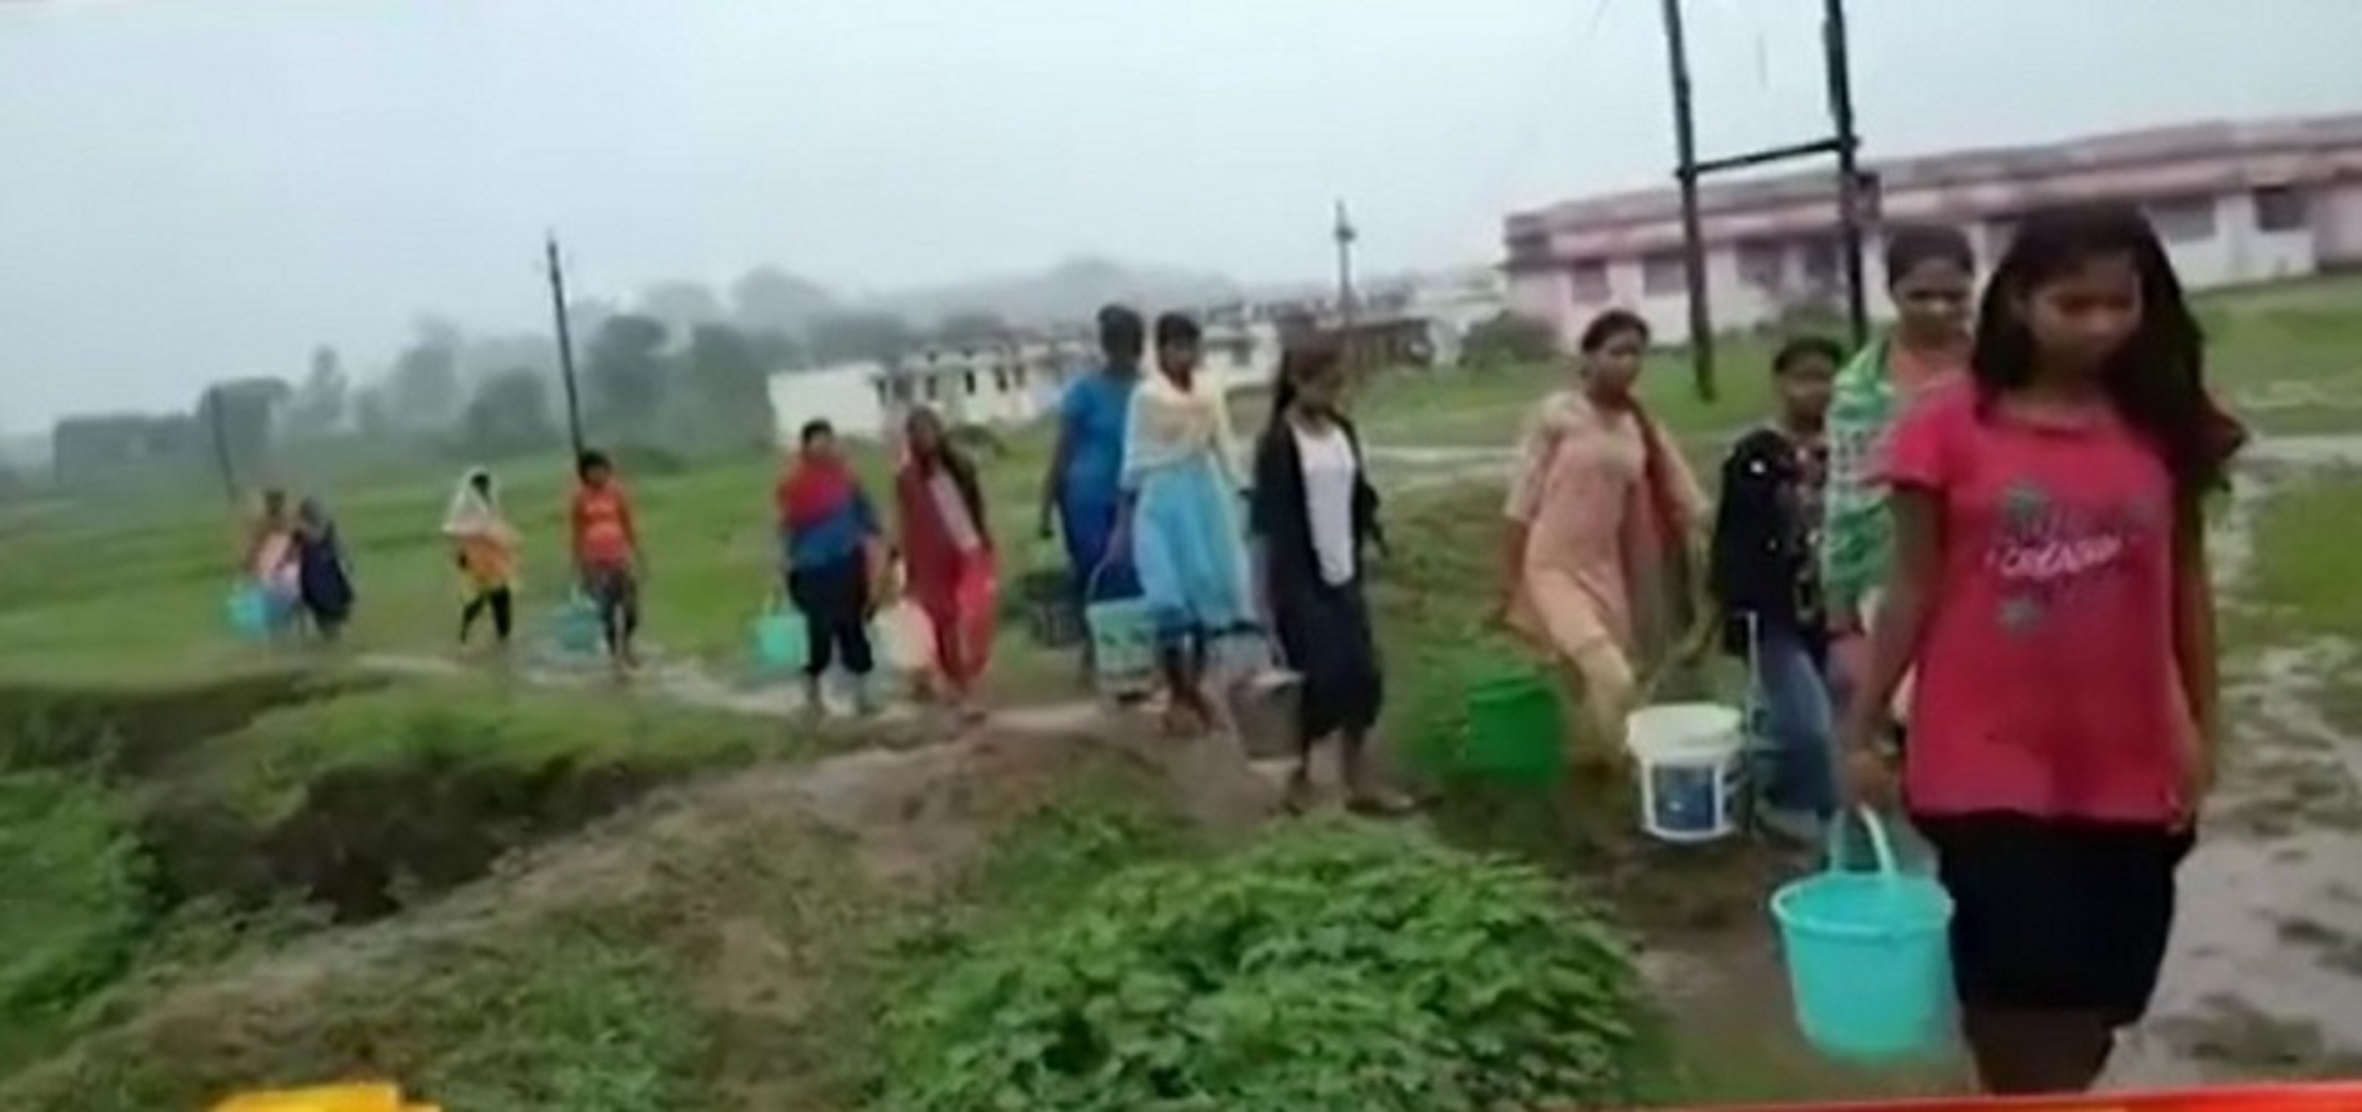 Senior hostel students are struggling with water problem in the rain